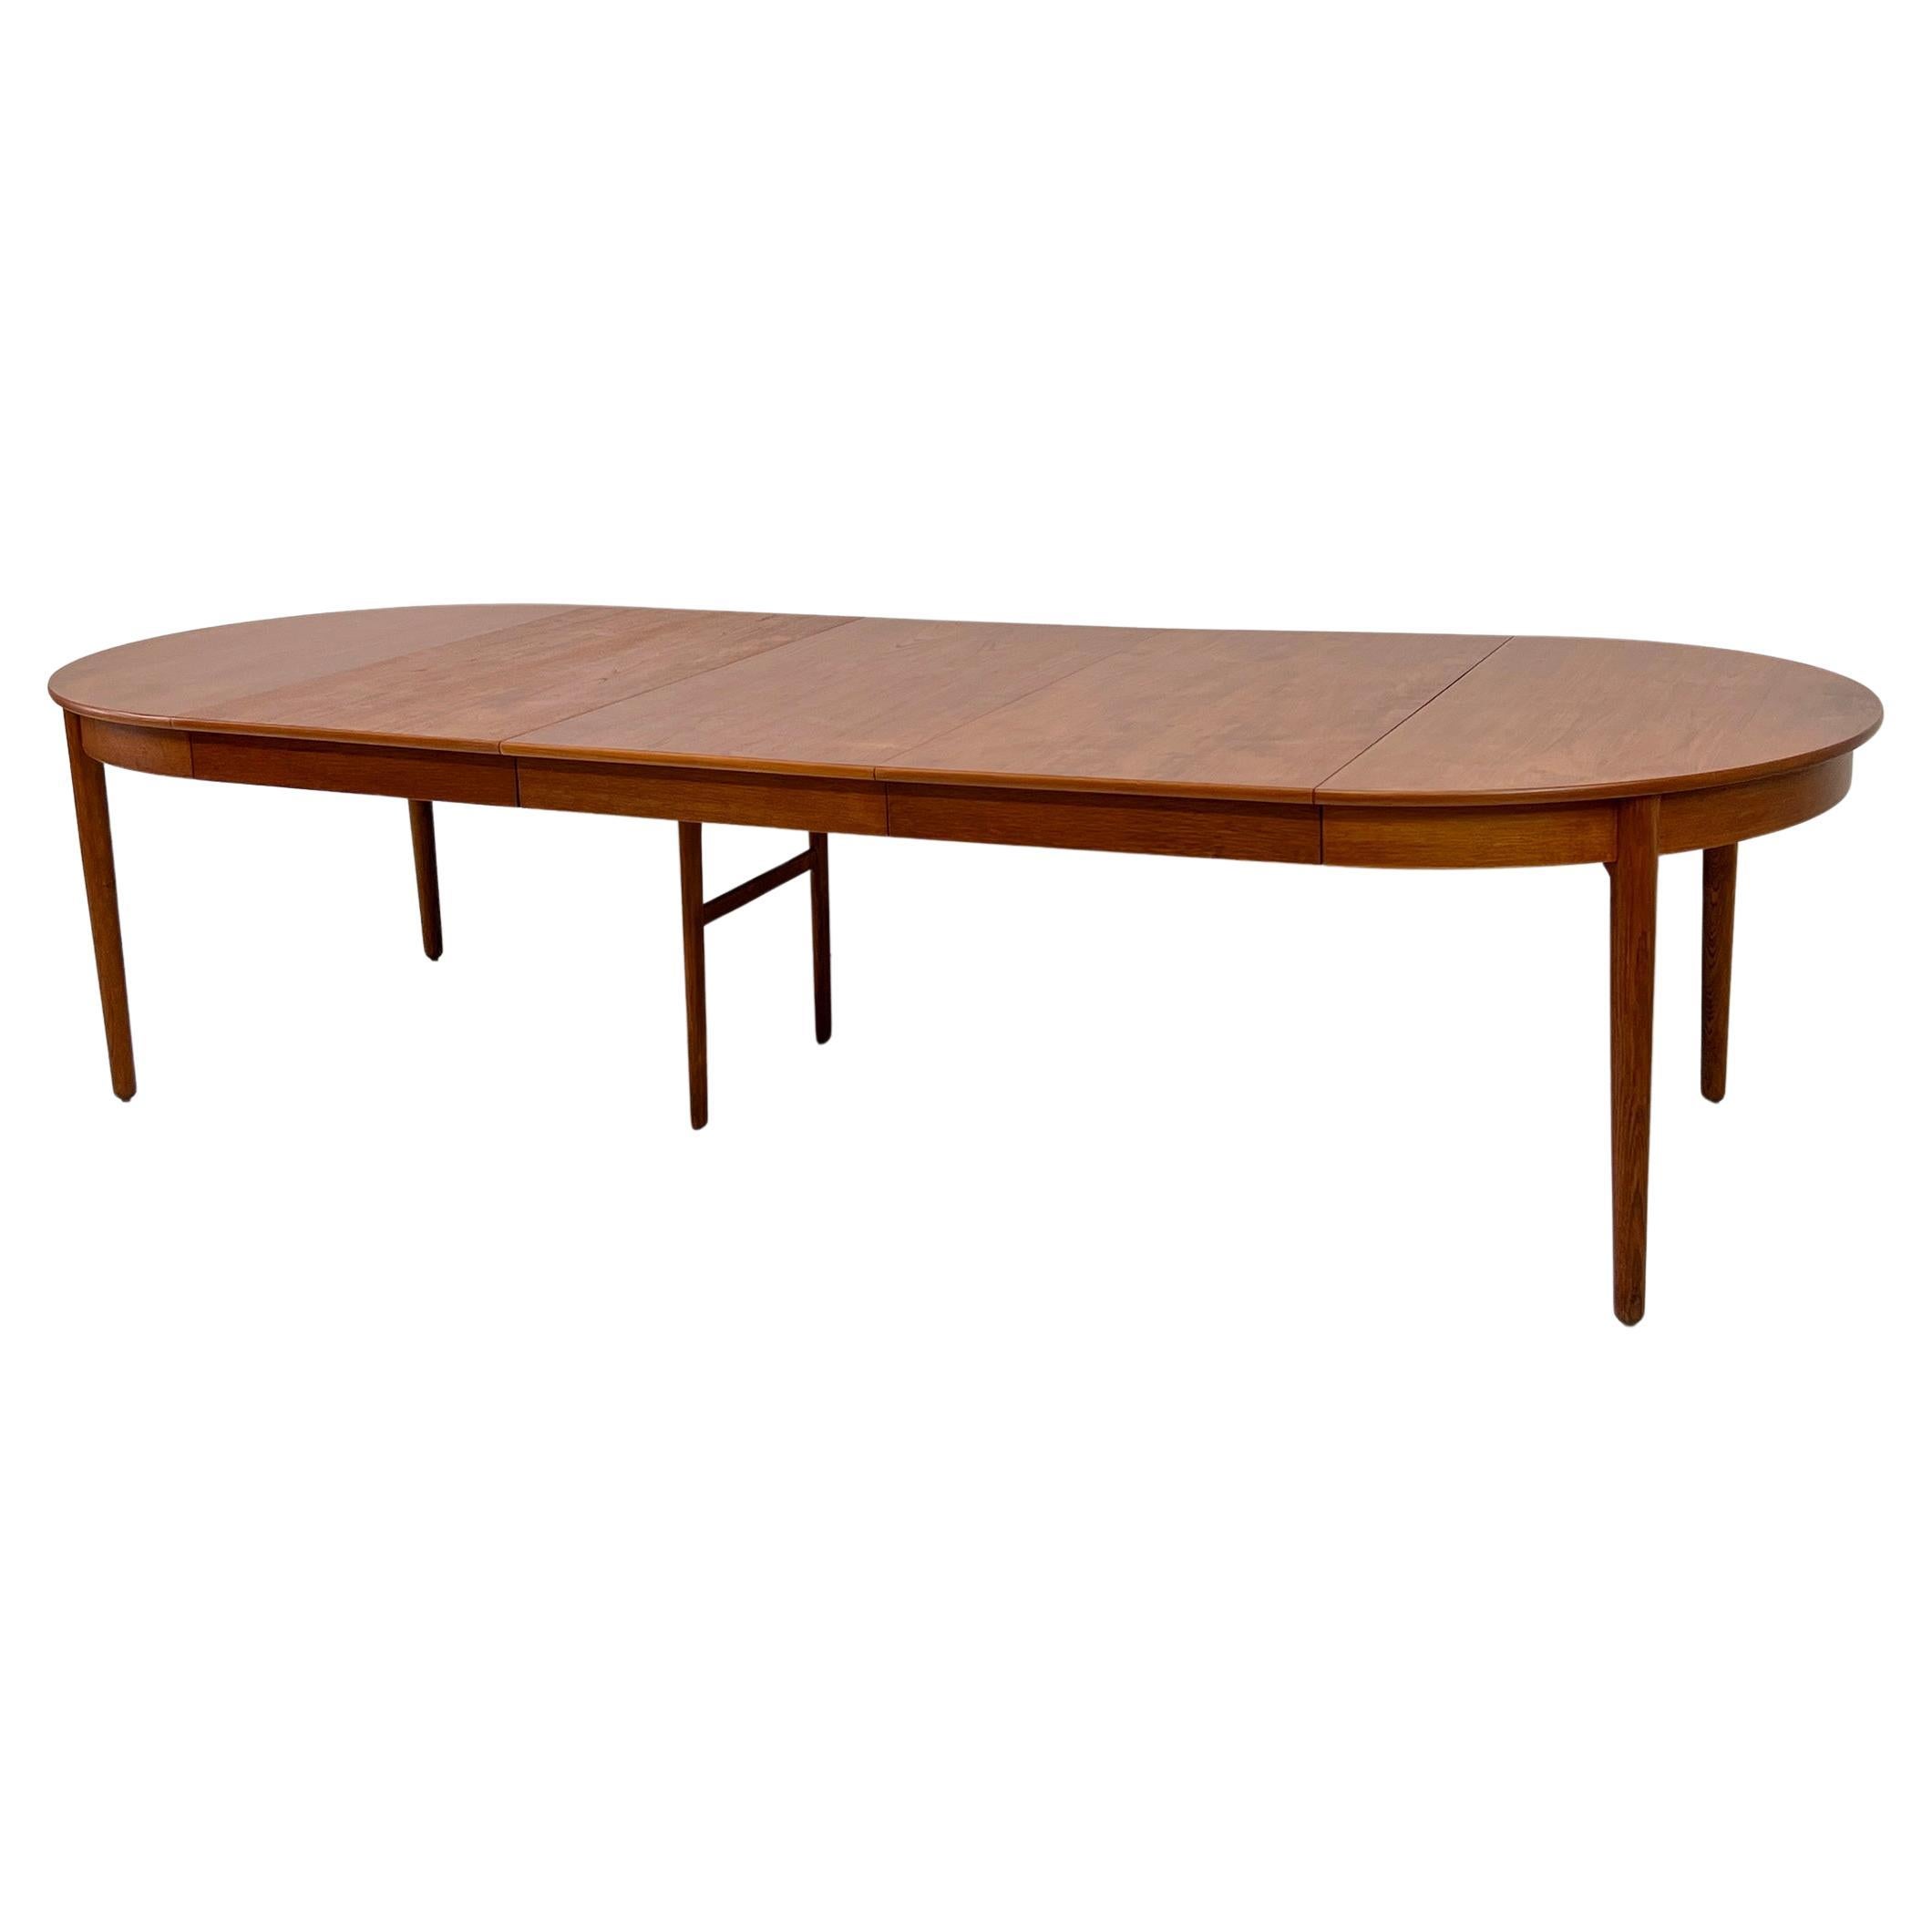 Andreas Tuck Dining Room Tables